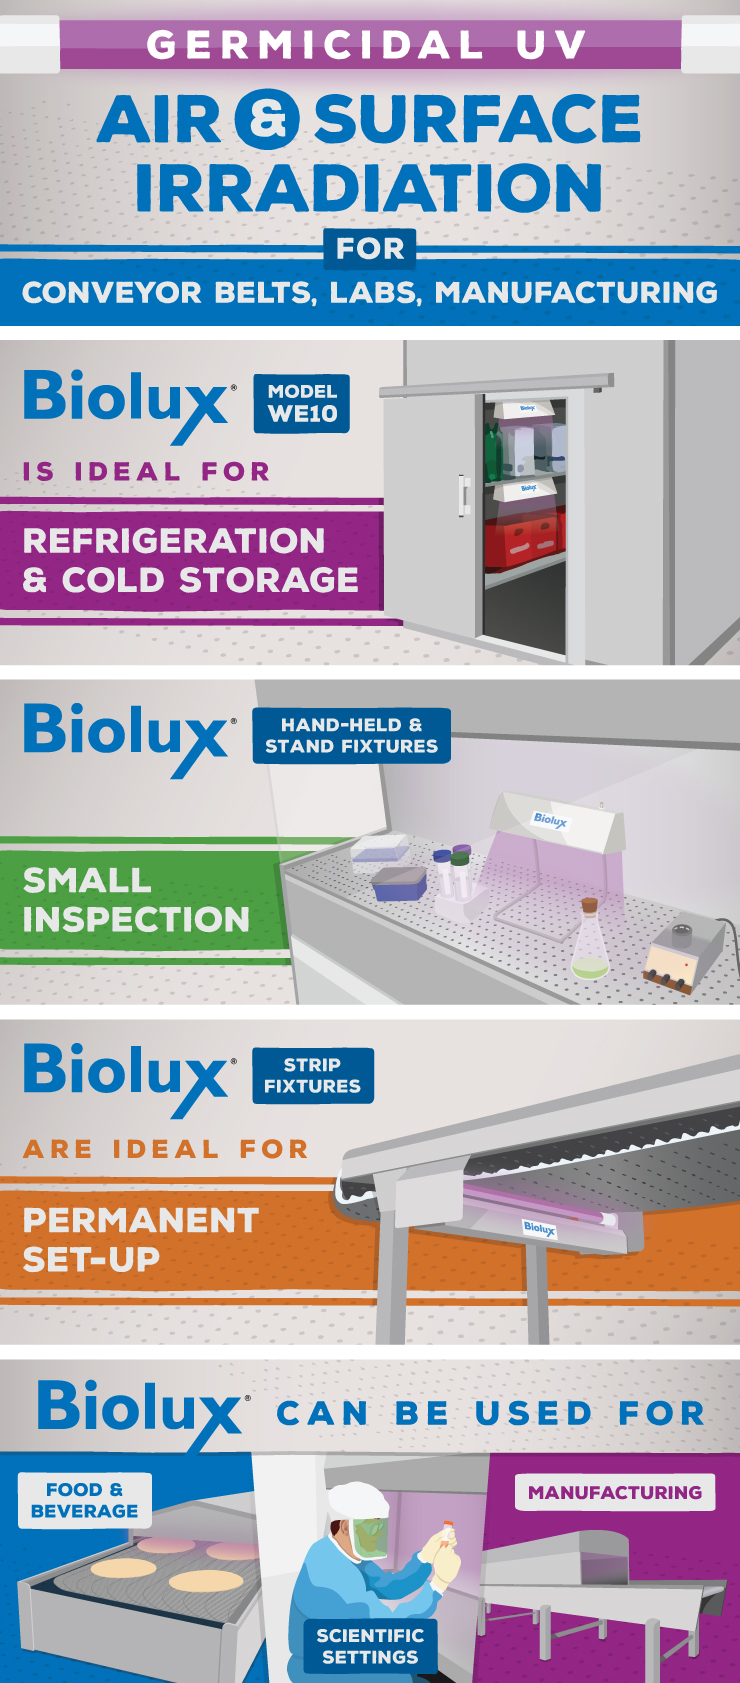 Germicidal UV Air and Surface Irradiation for Conveyor Belts, Labs, Manufacturing - Infographic